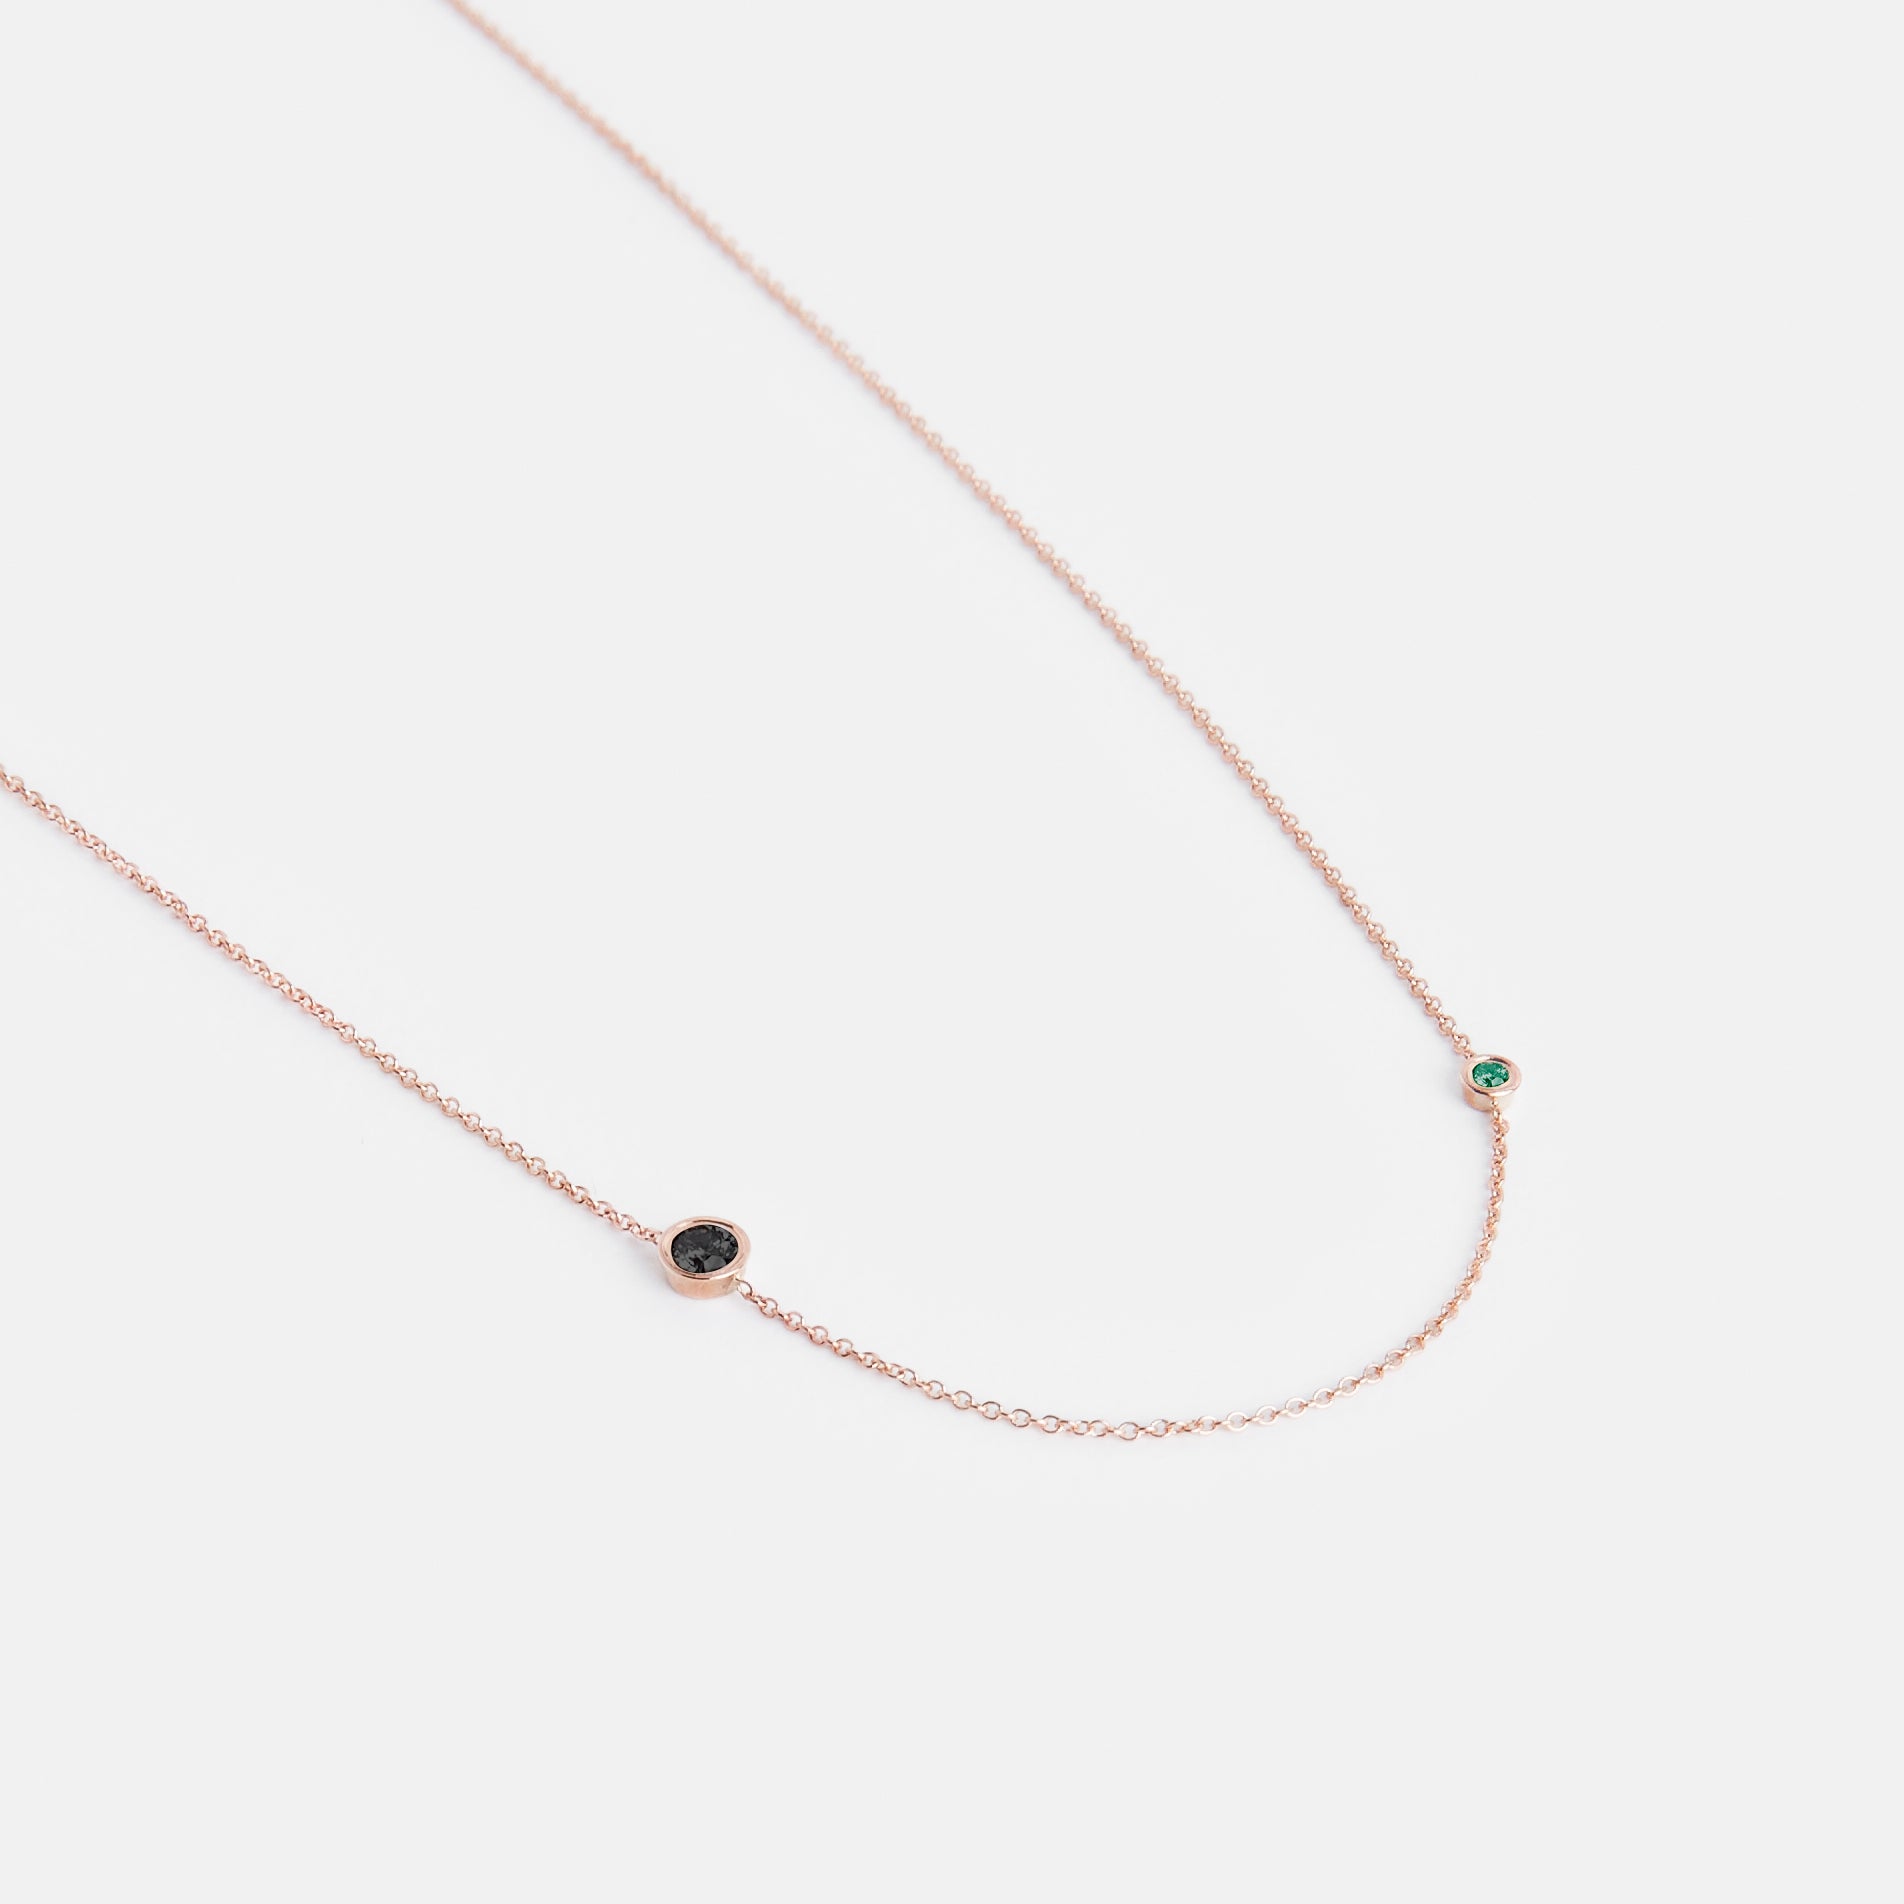 Iba Designer Necklace in 14k Rose Gold set with Black Diamond and Emerald By SHW Fine Jewelry NYC